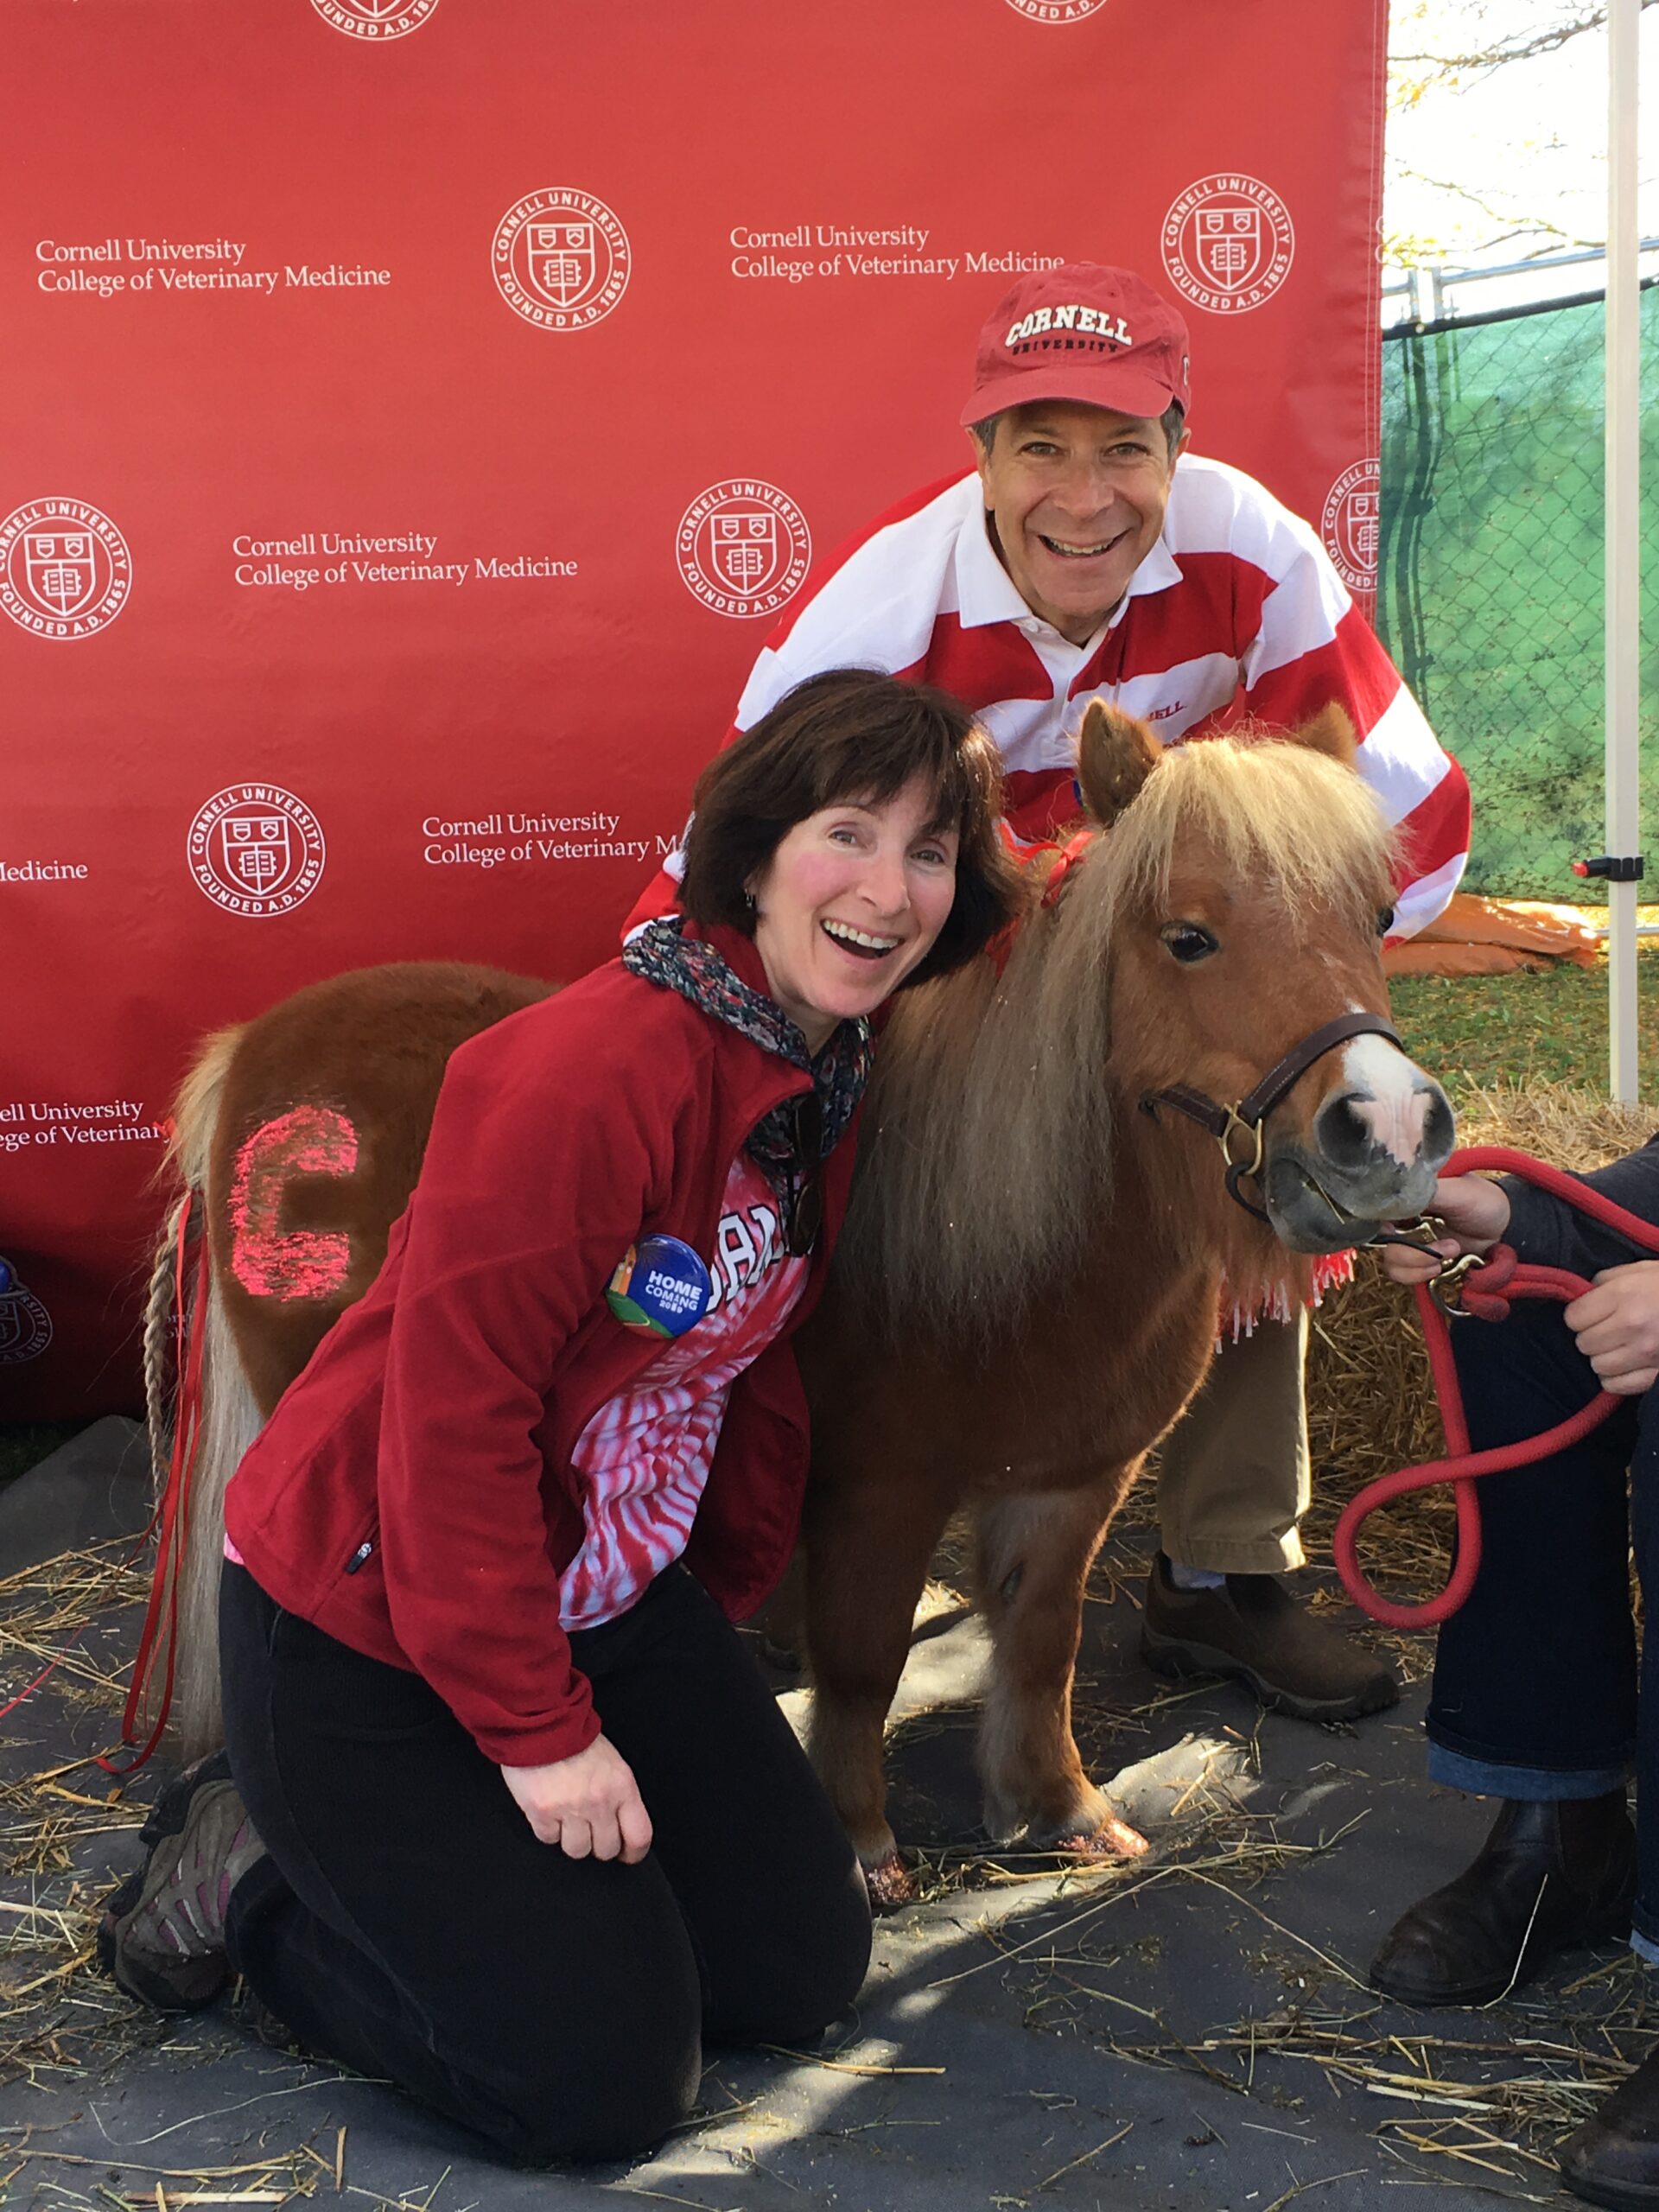 Adrienne McVicker Reing ’87 and Charles Reing ’86 with Minnie the Miniature Horse